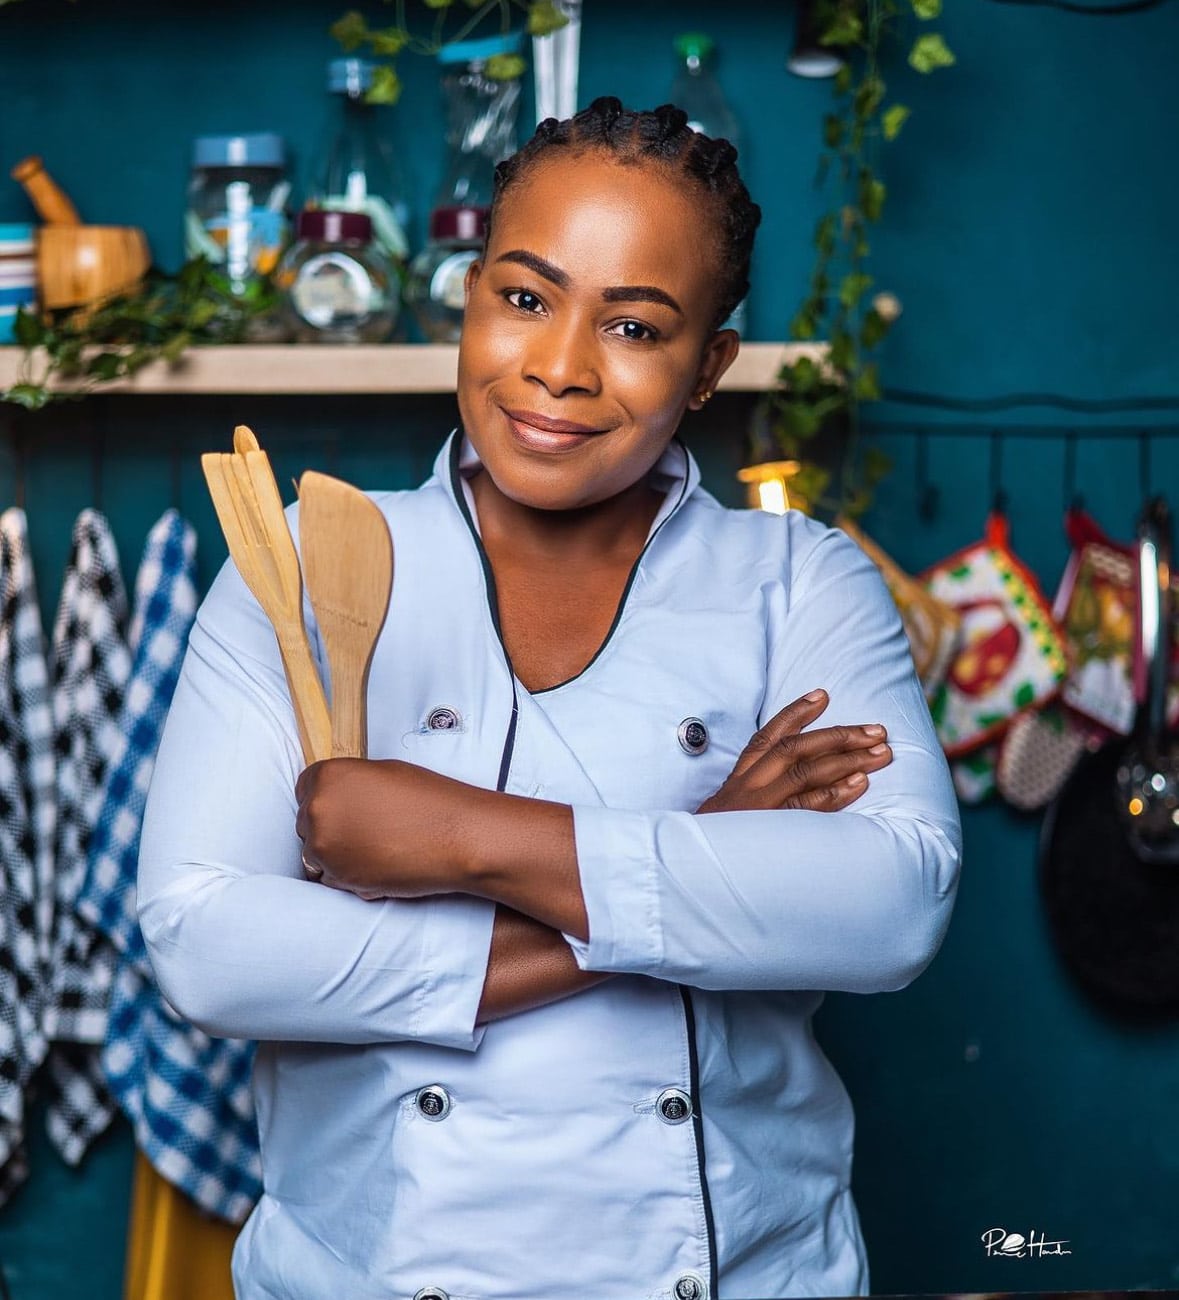 Ghanaian chef, Faila disqualified following 227-hours Cook-A-Thon